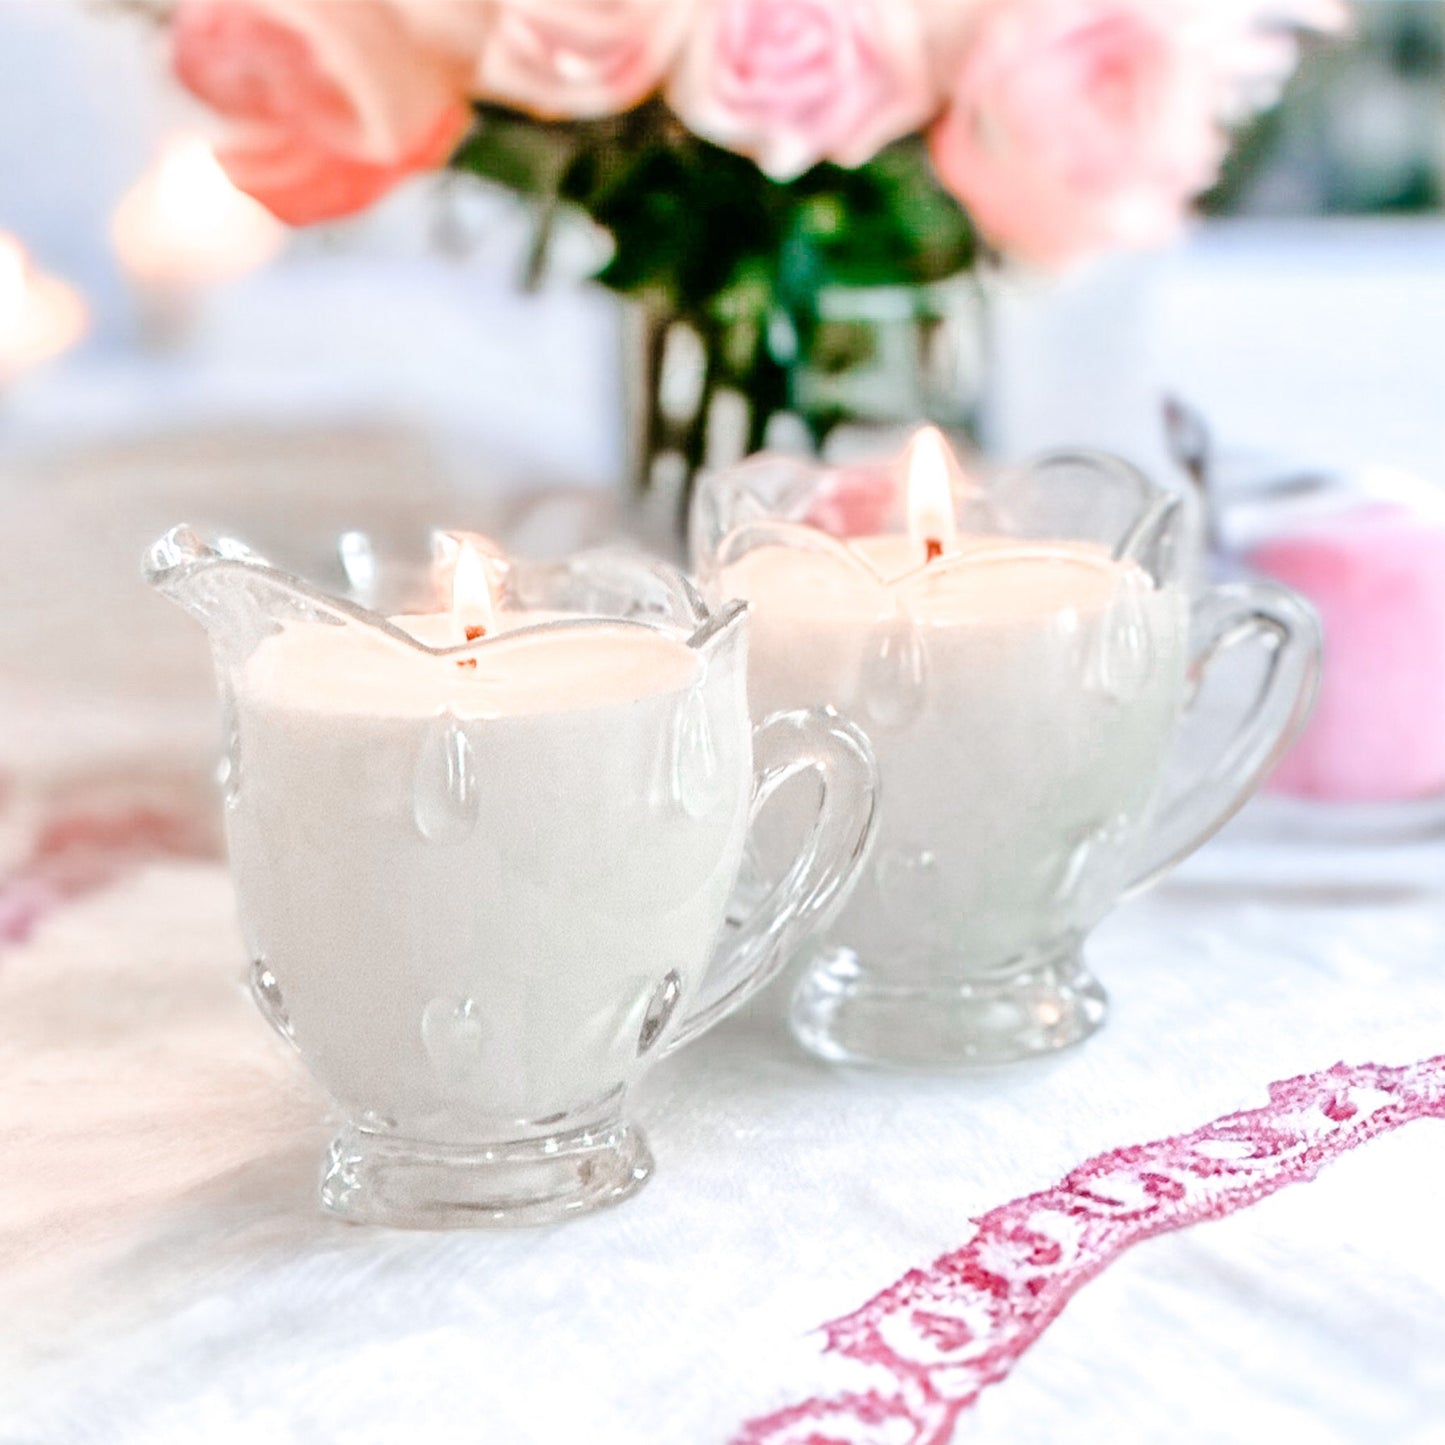 Moonflower Soy Candle in Vintage Indiana Glass Sugar & Creamer Set